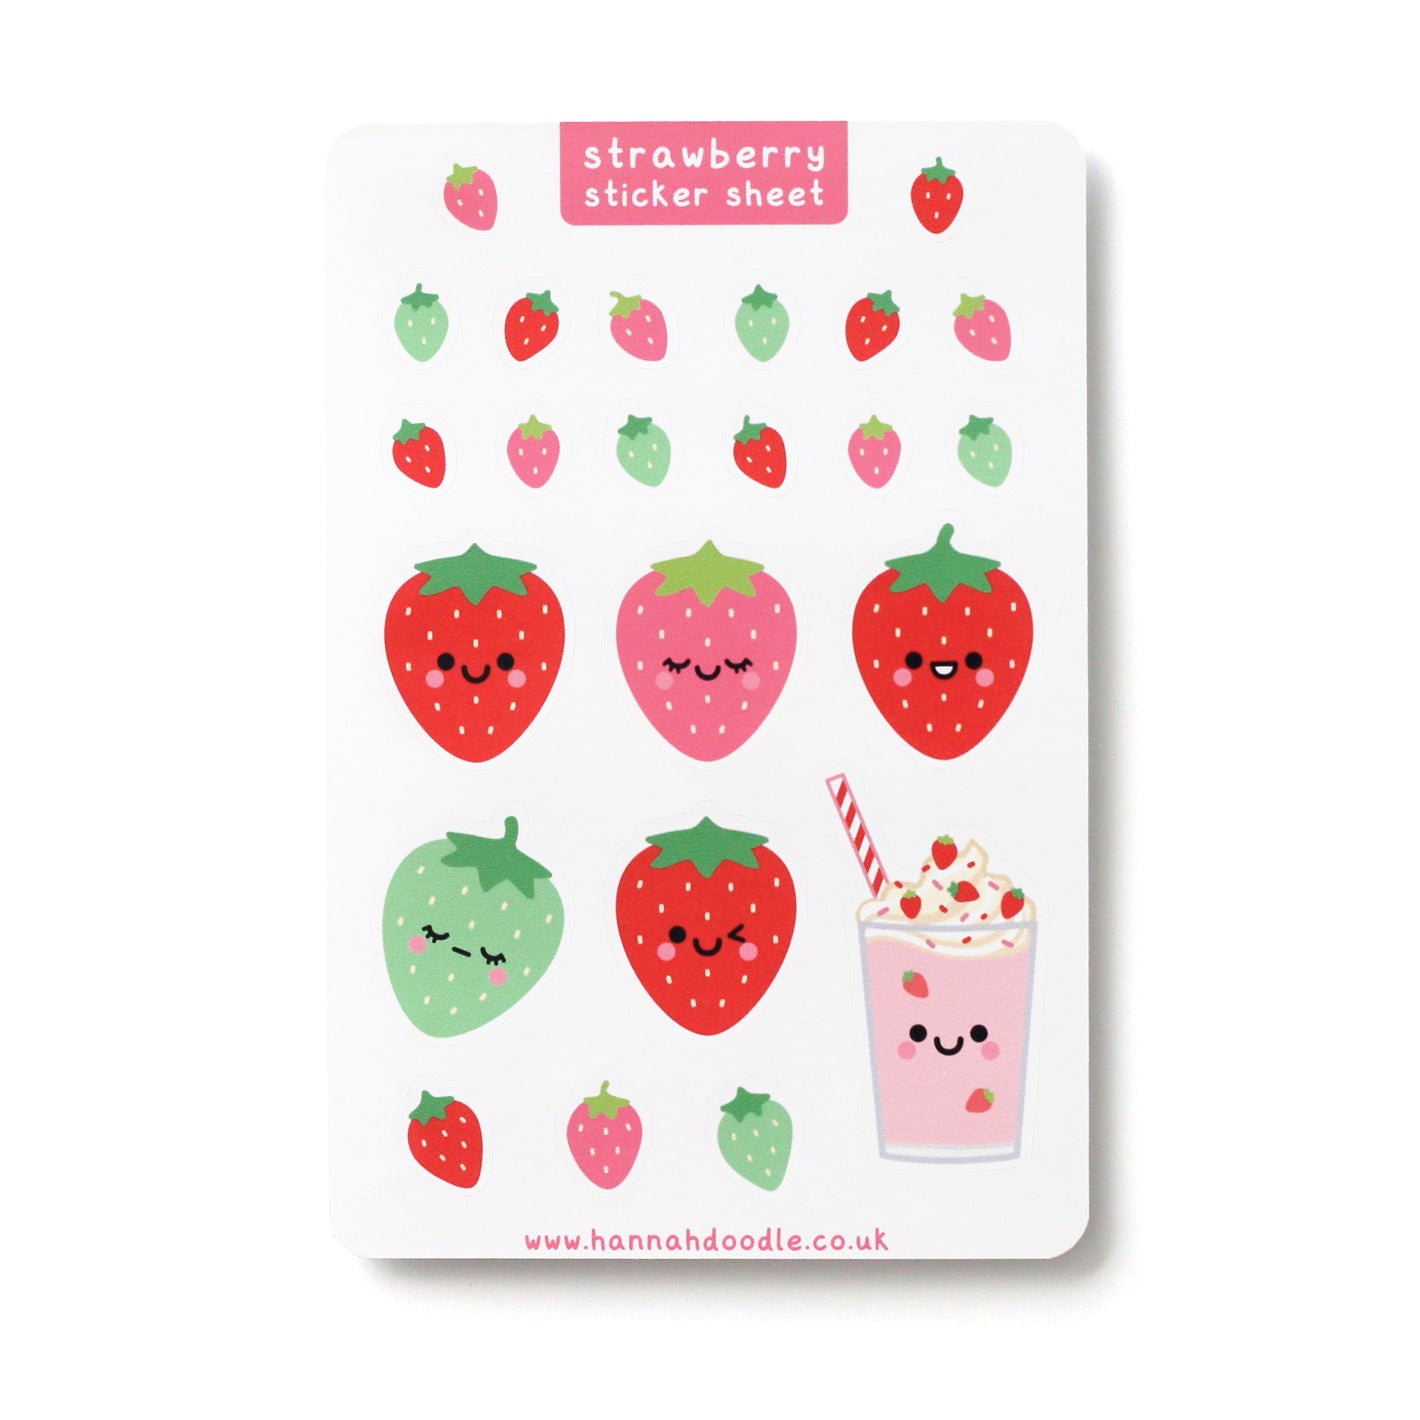 Strawberry sticker sheet by hannahdoodle